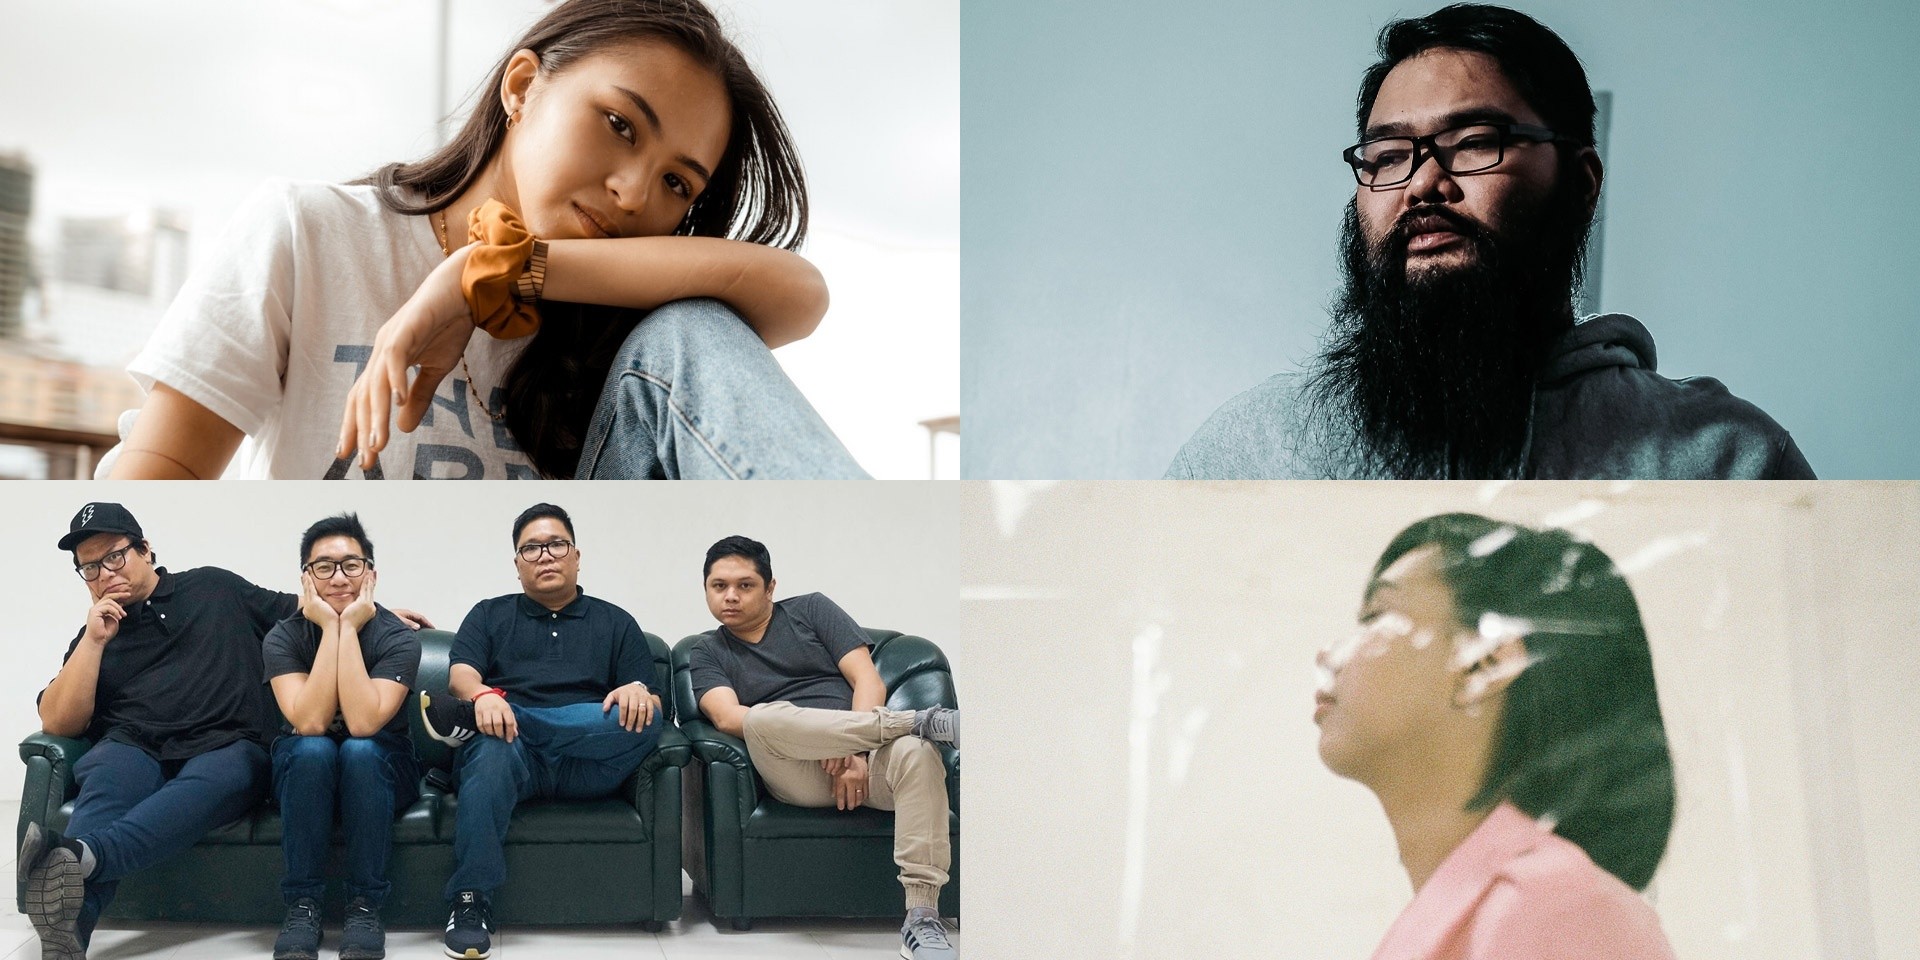 Asch and Clara Benin, The Itchyworms and The CompanY, I Belong to the Zoo, and more release new music – listen